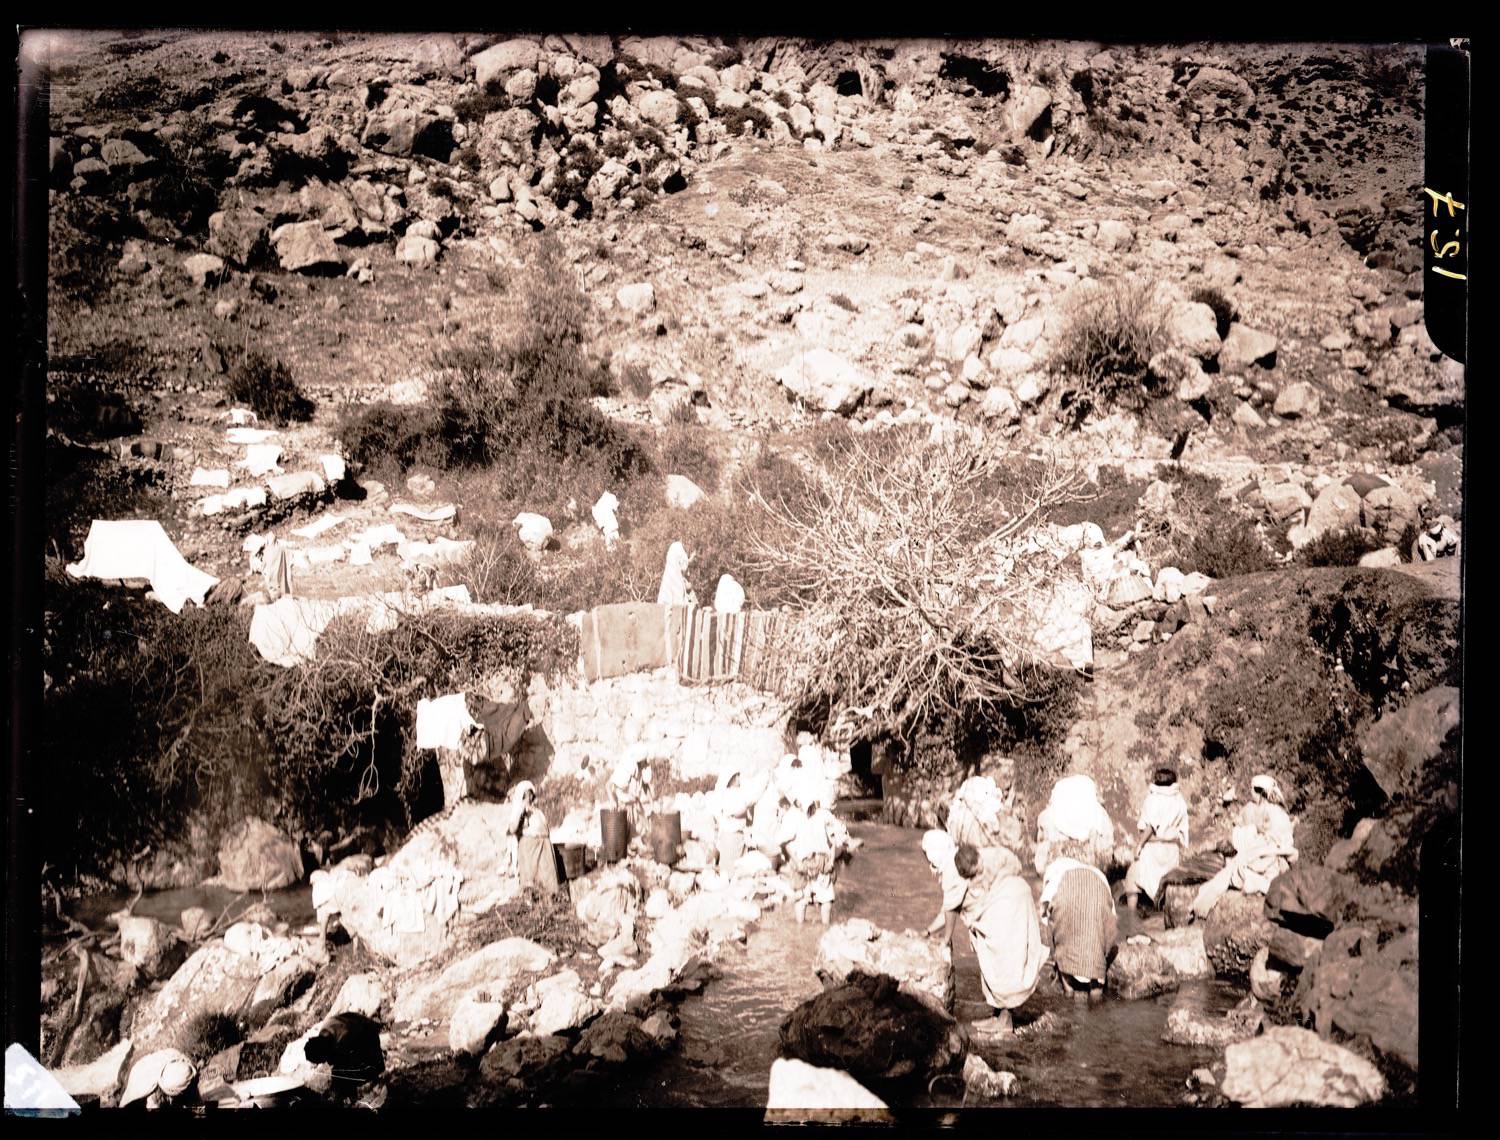 View of women doing laundry in a stream on the road to Chefchaouen